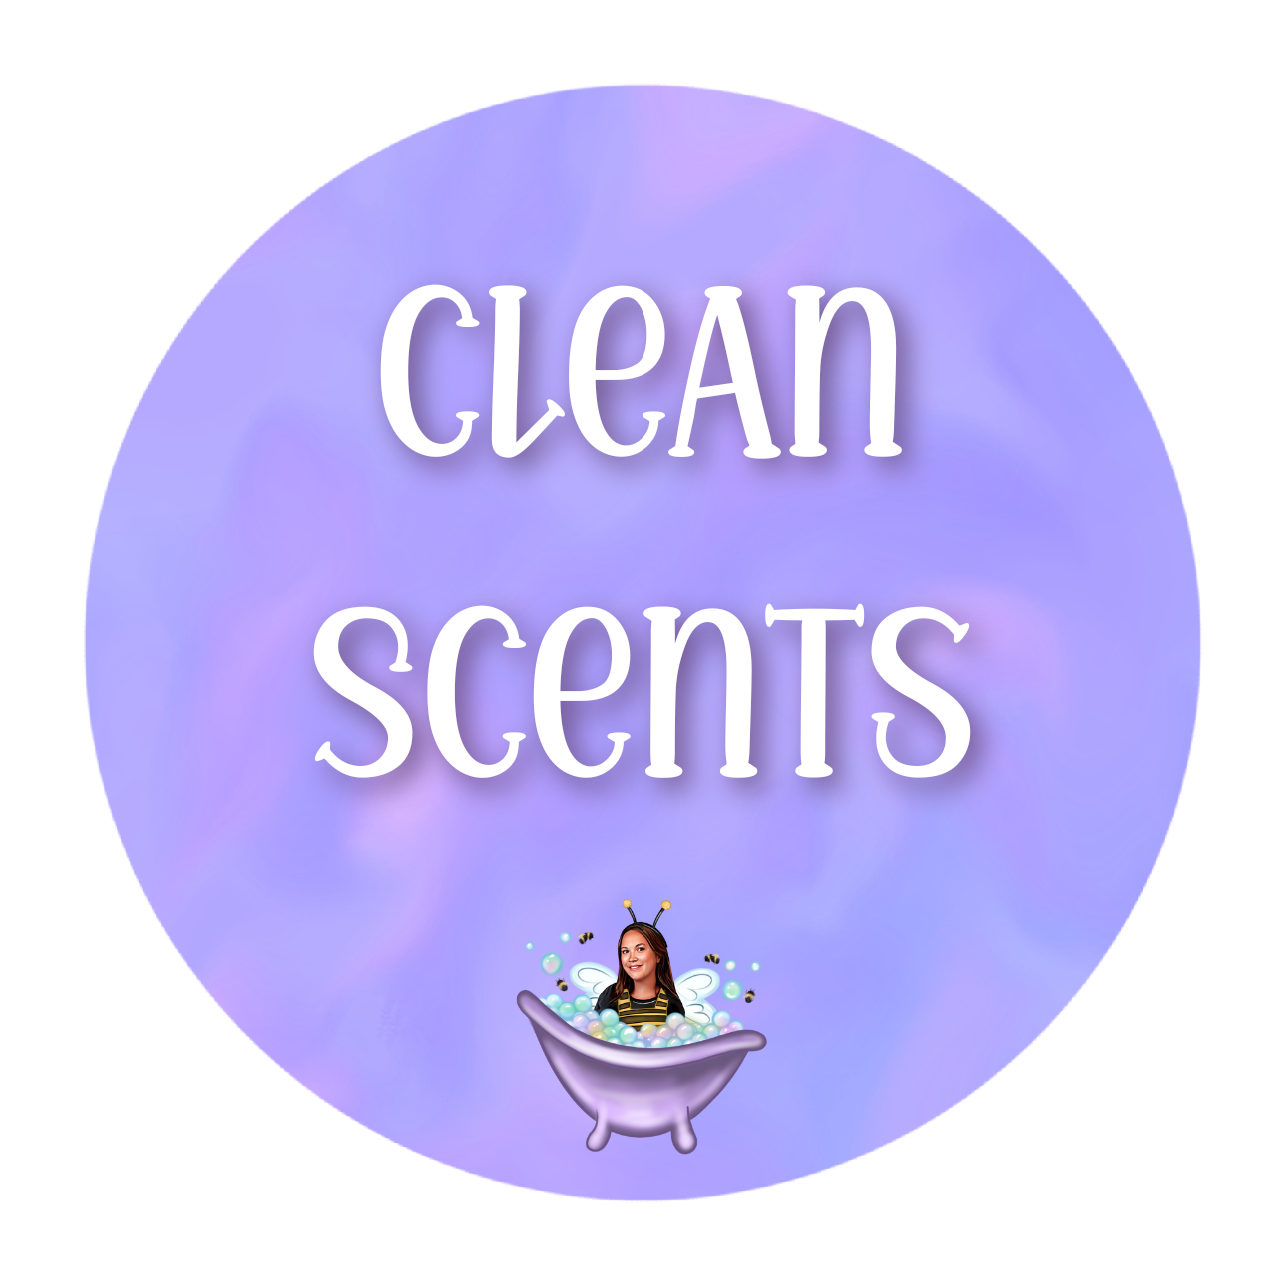 Clean Scents